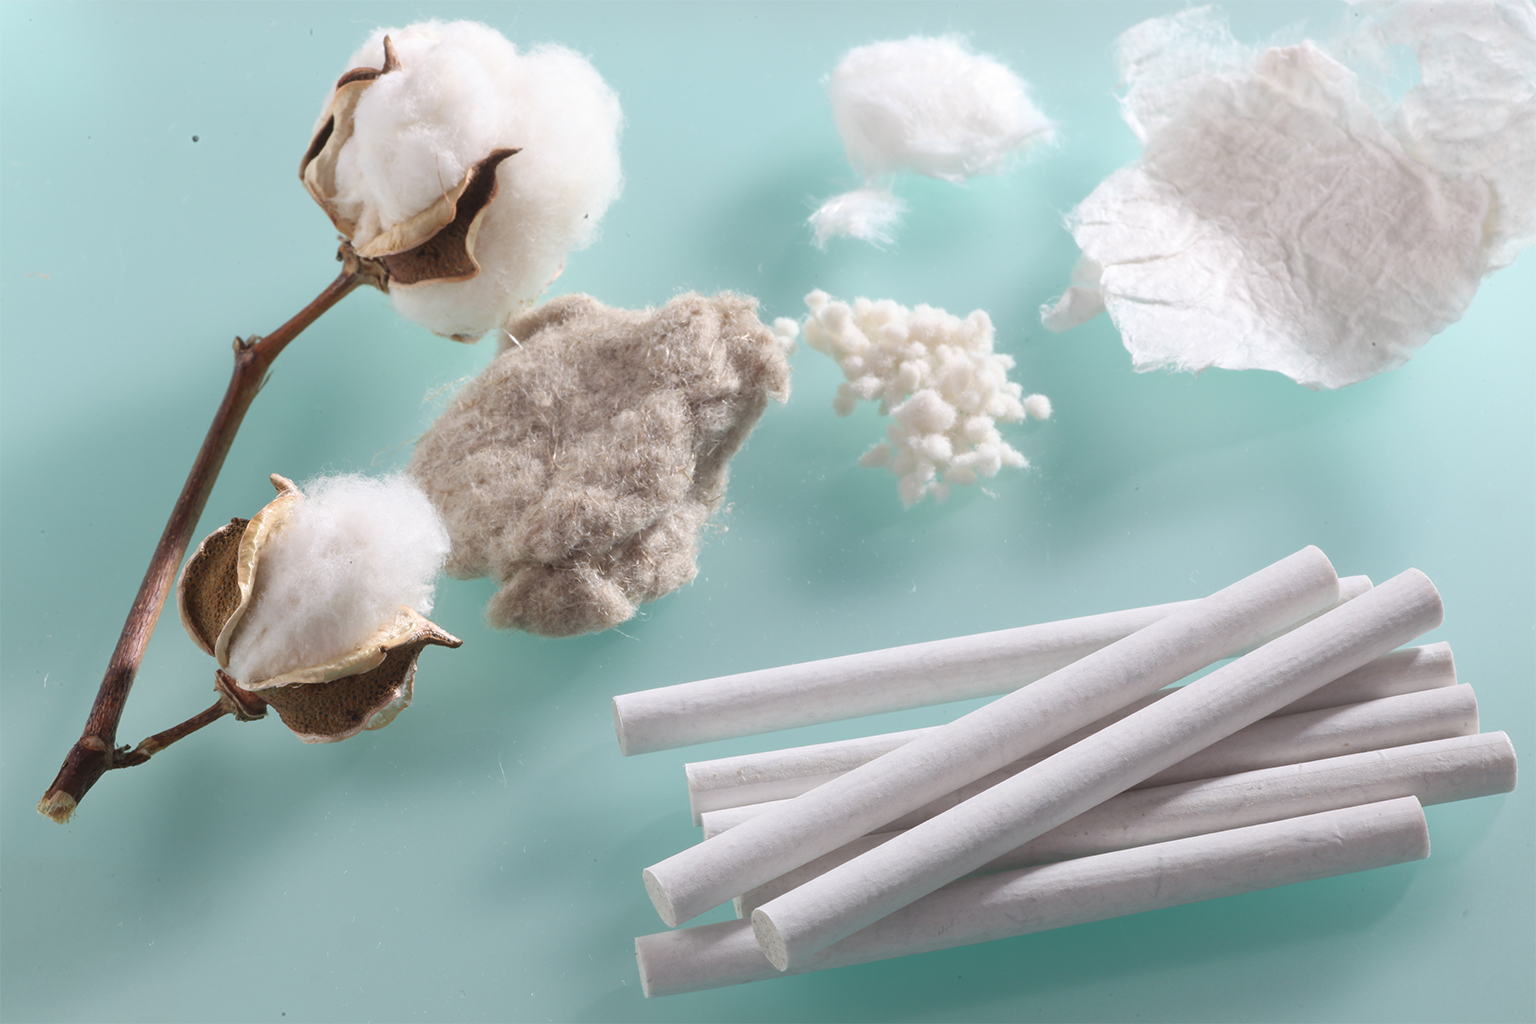 Ingredients that go into a biodegradable cigarette.